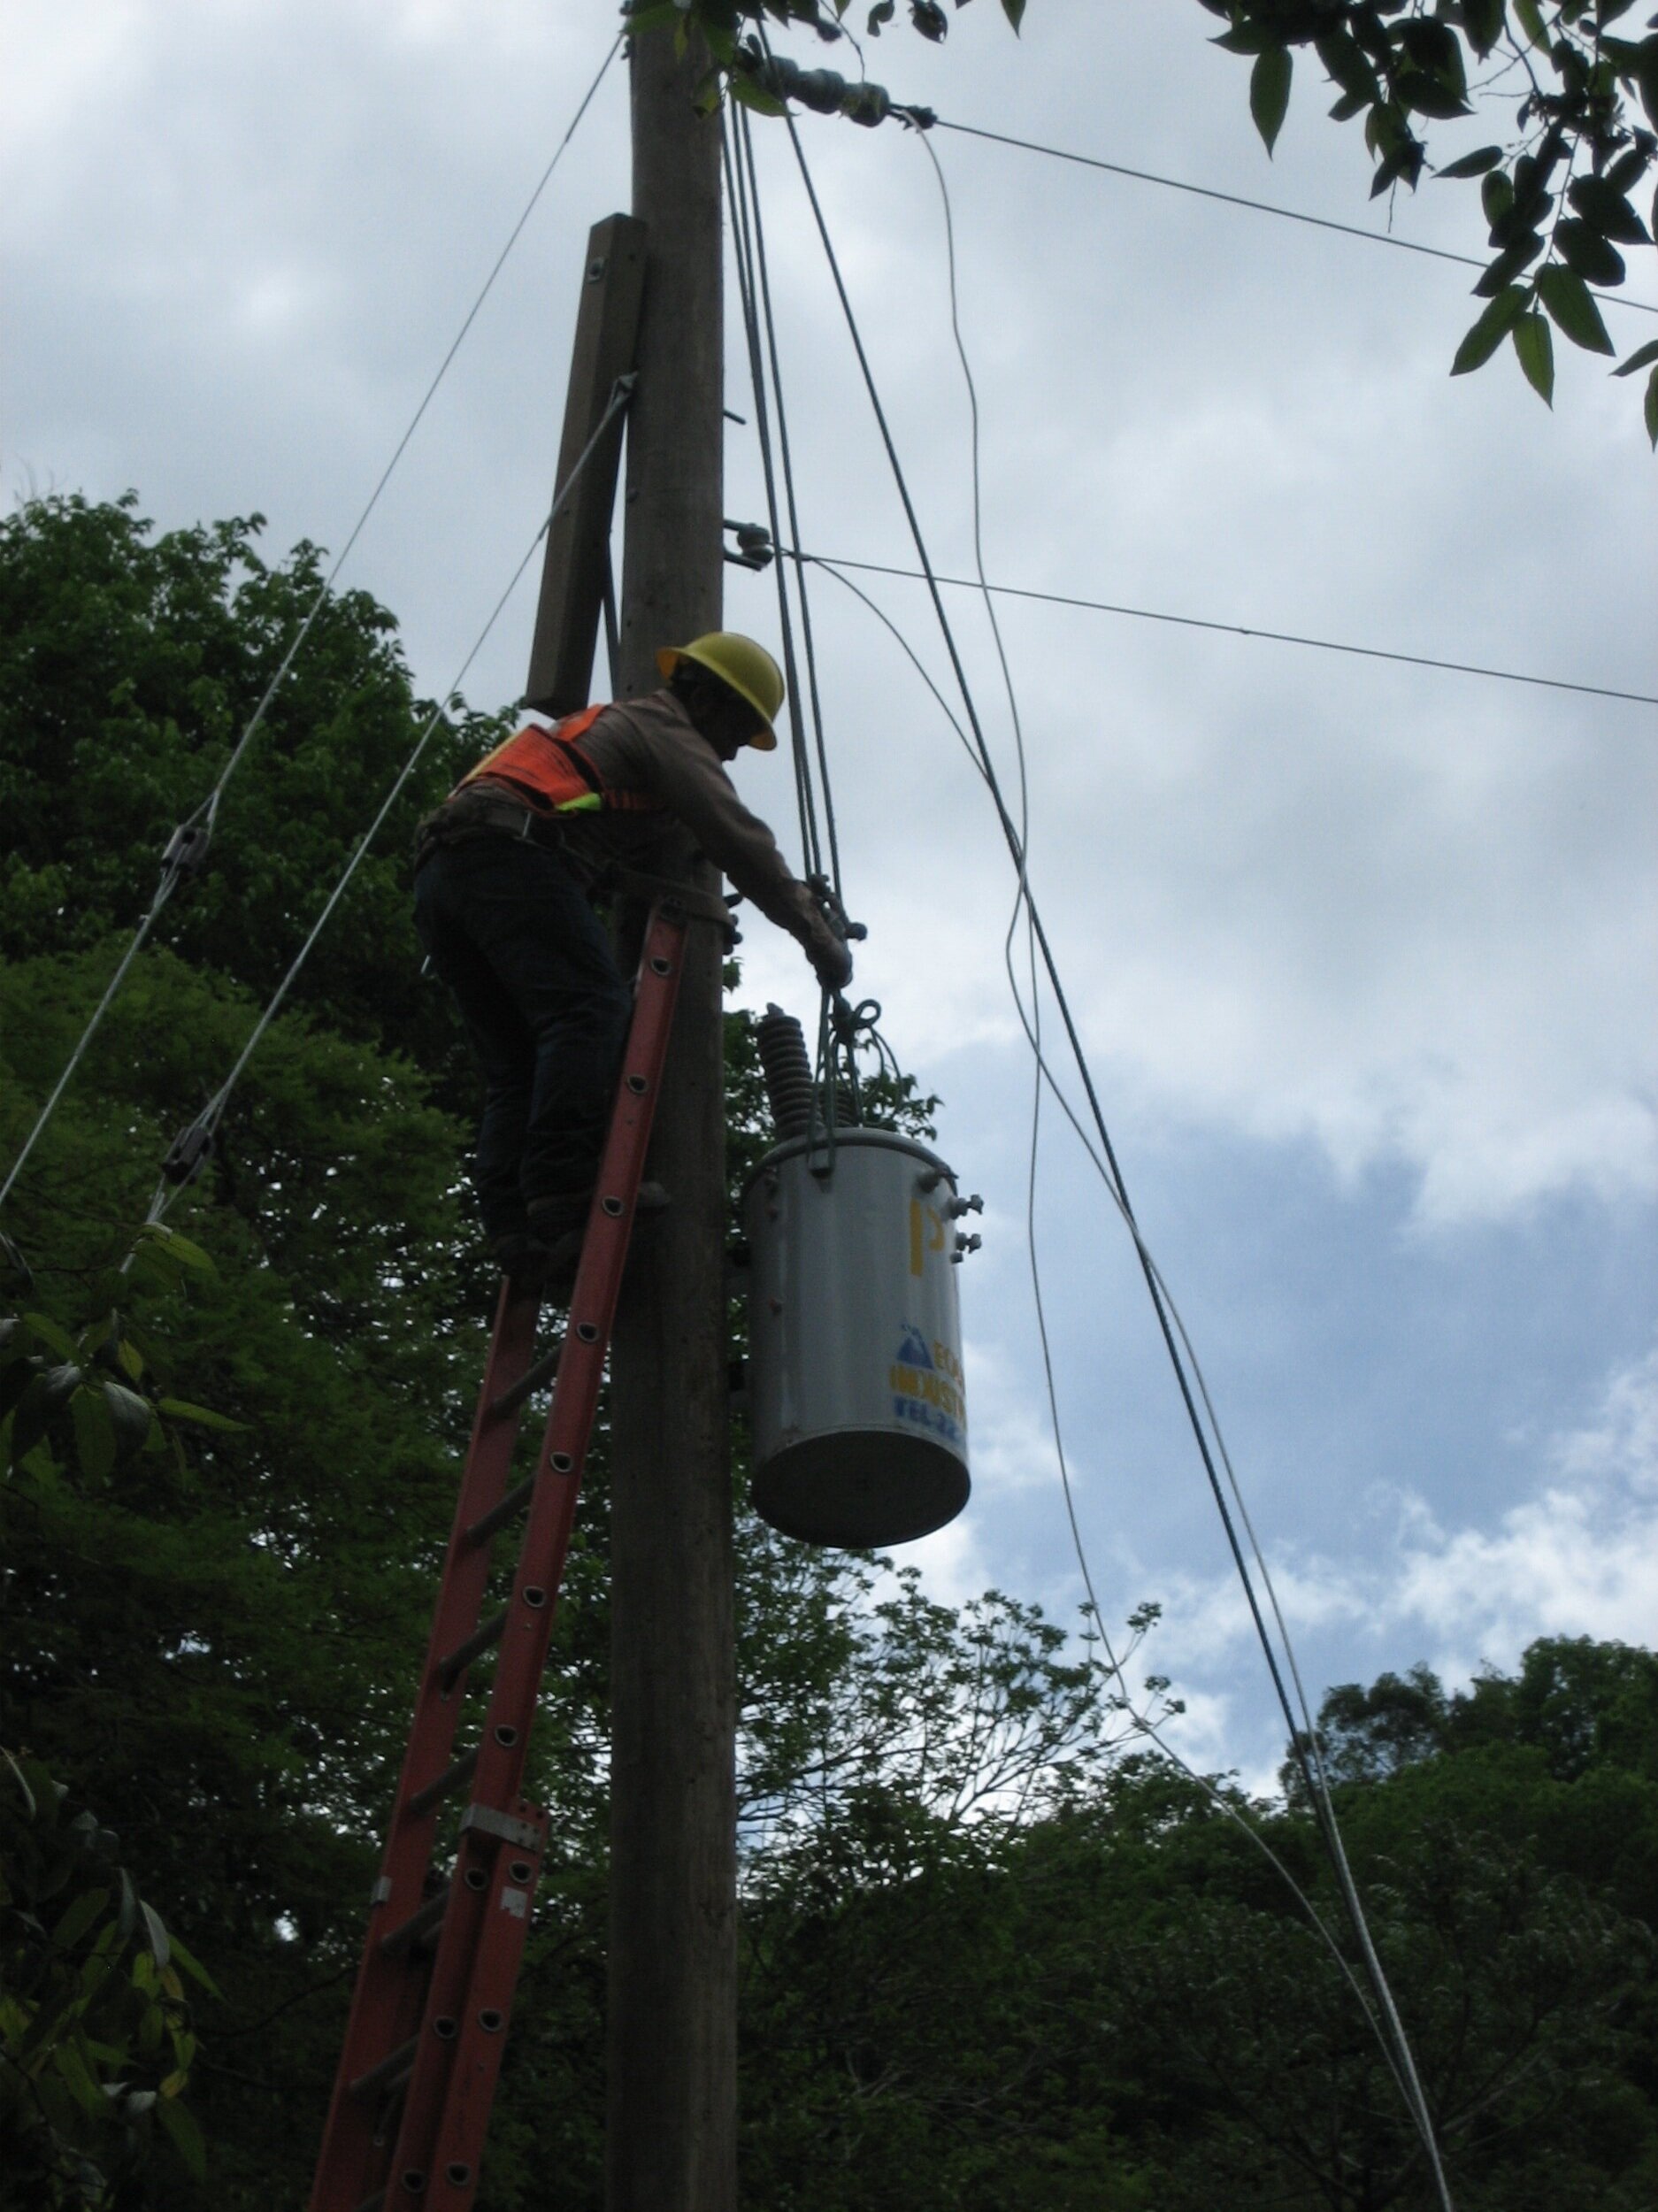 Line workers raise the electrical transformer into place.